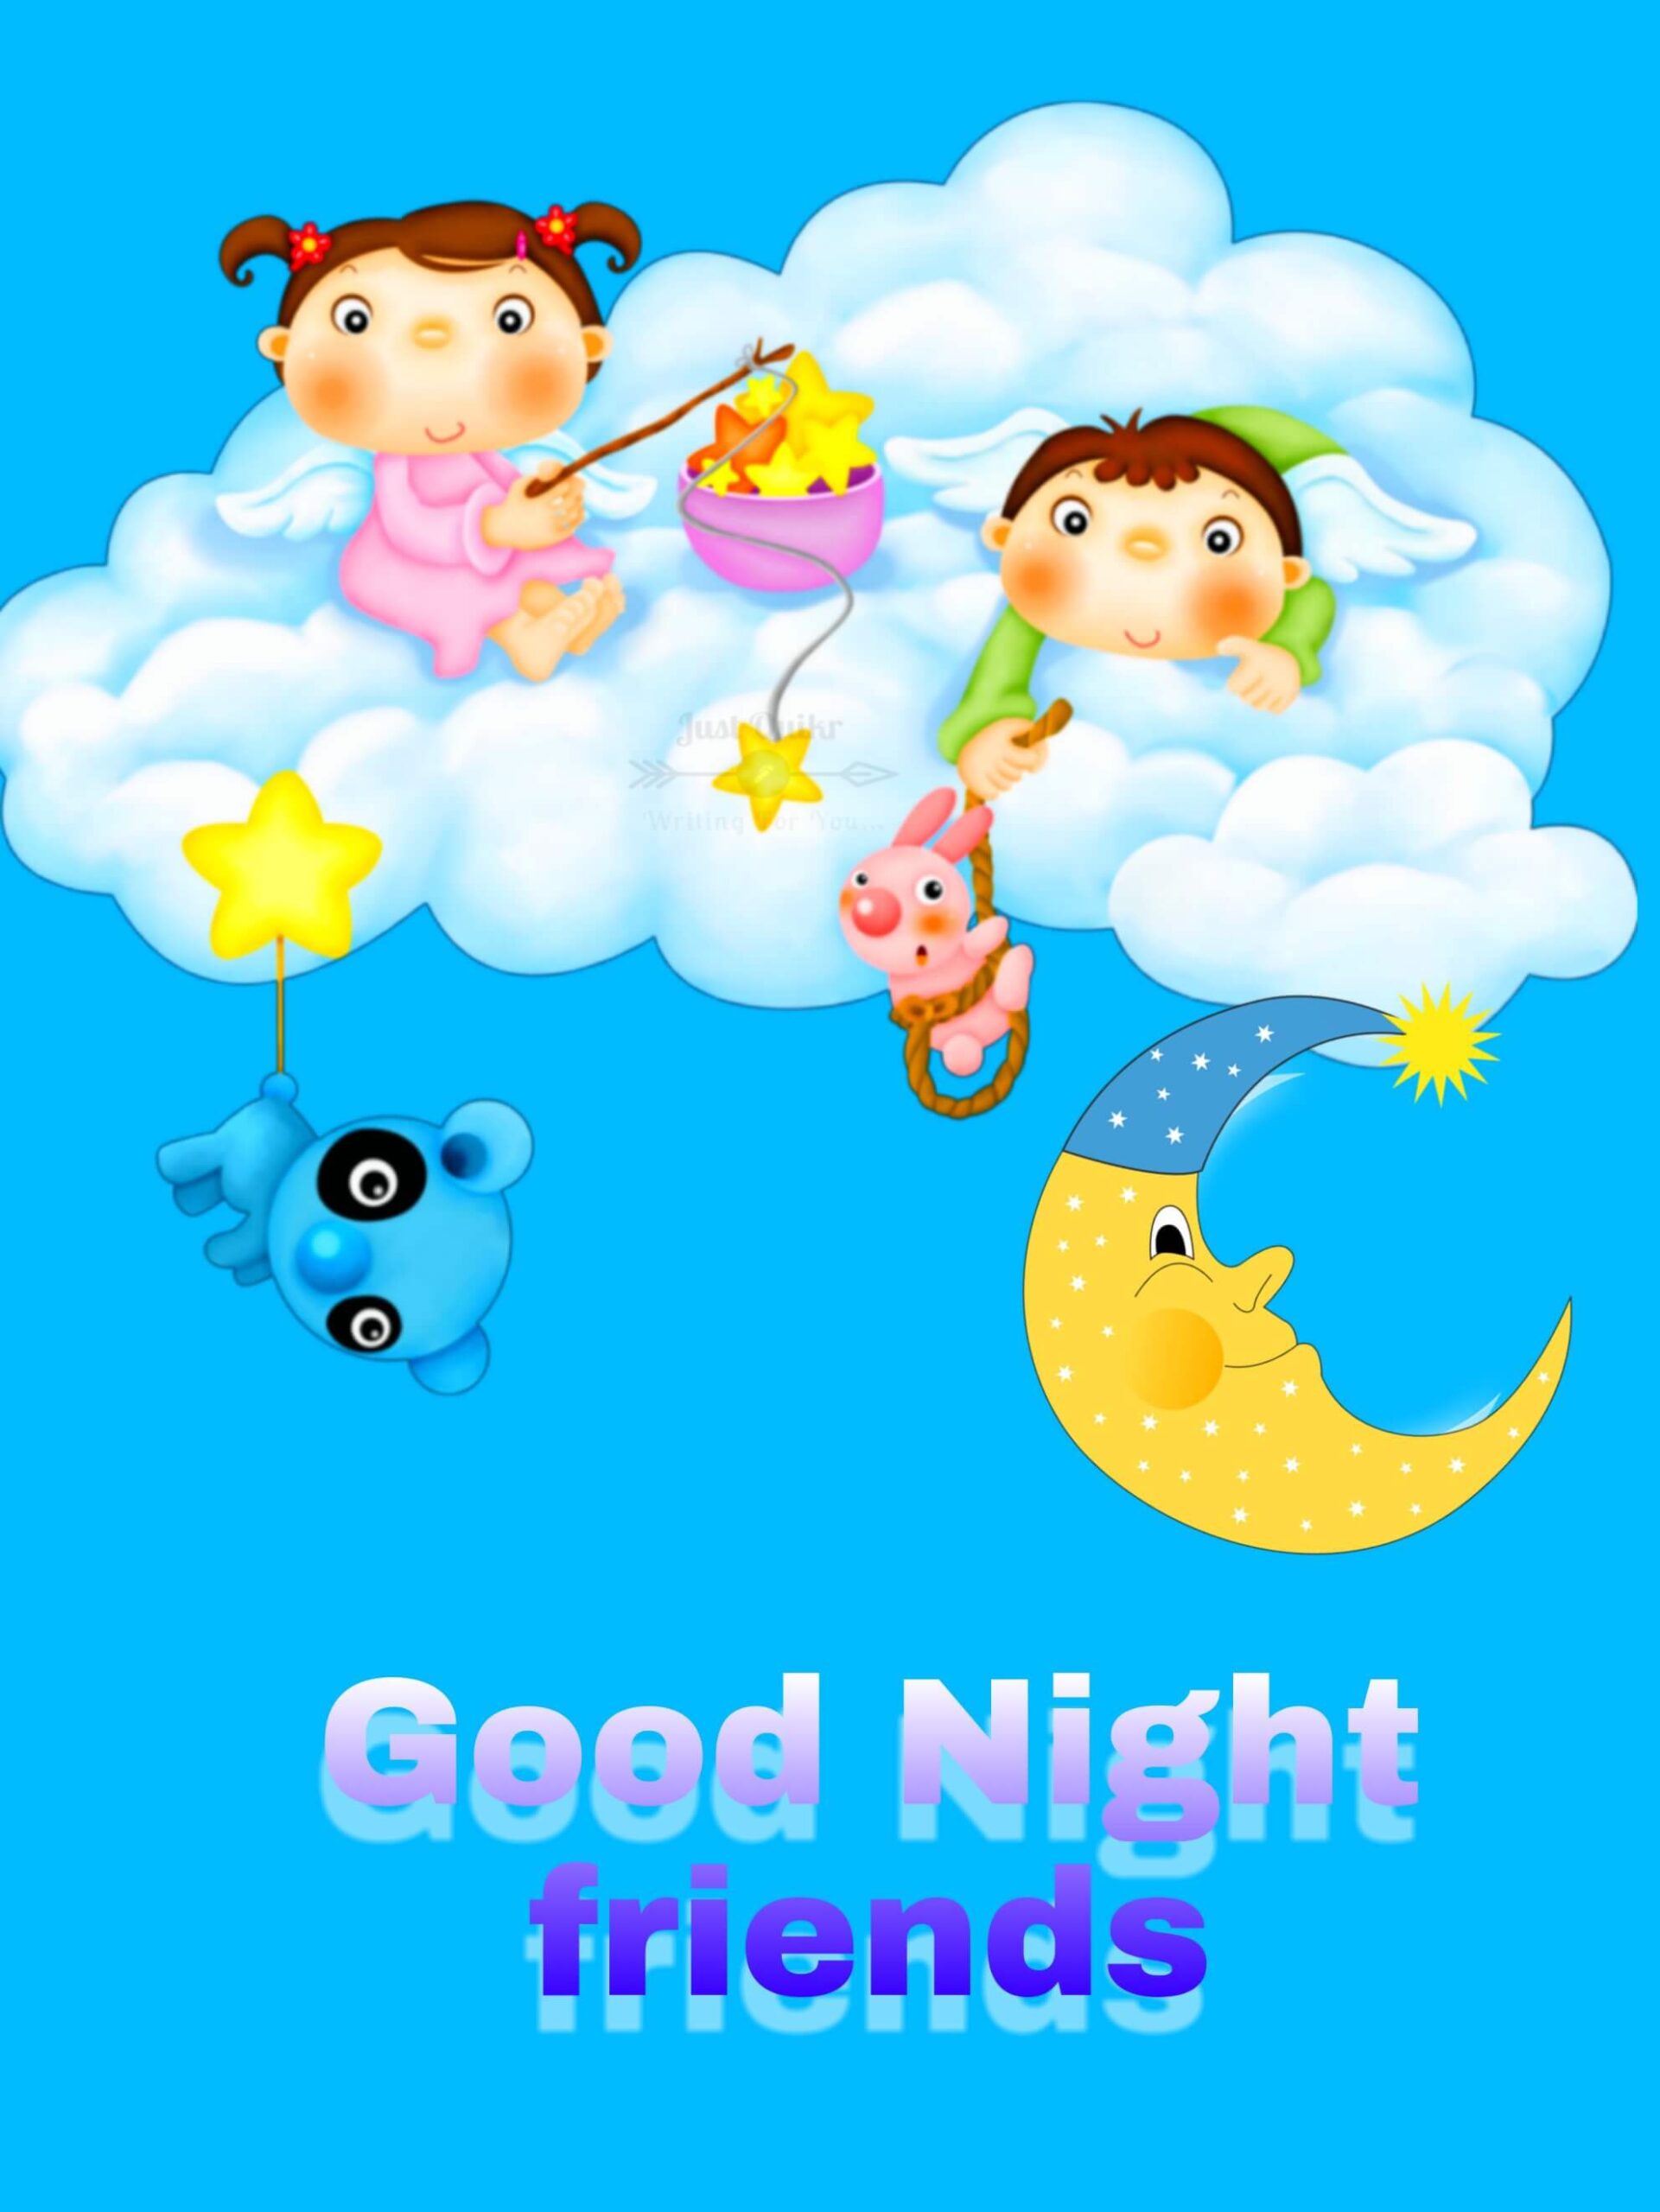 Good Night HD Pics Images For a Friend